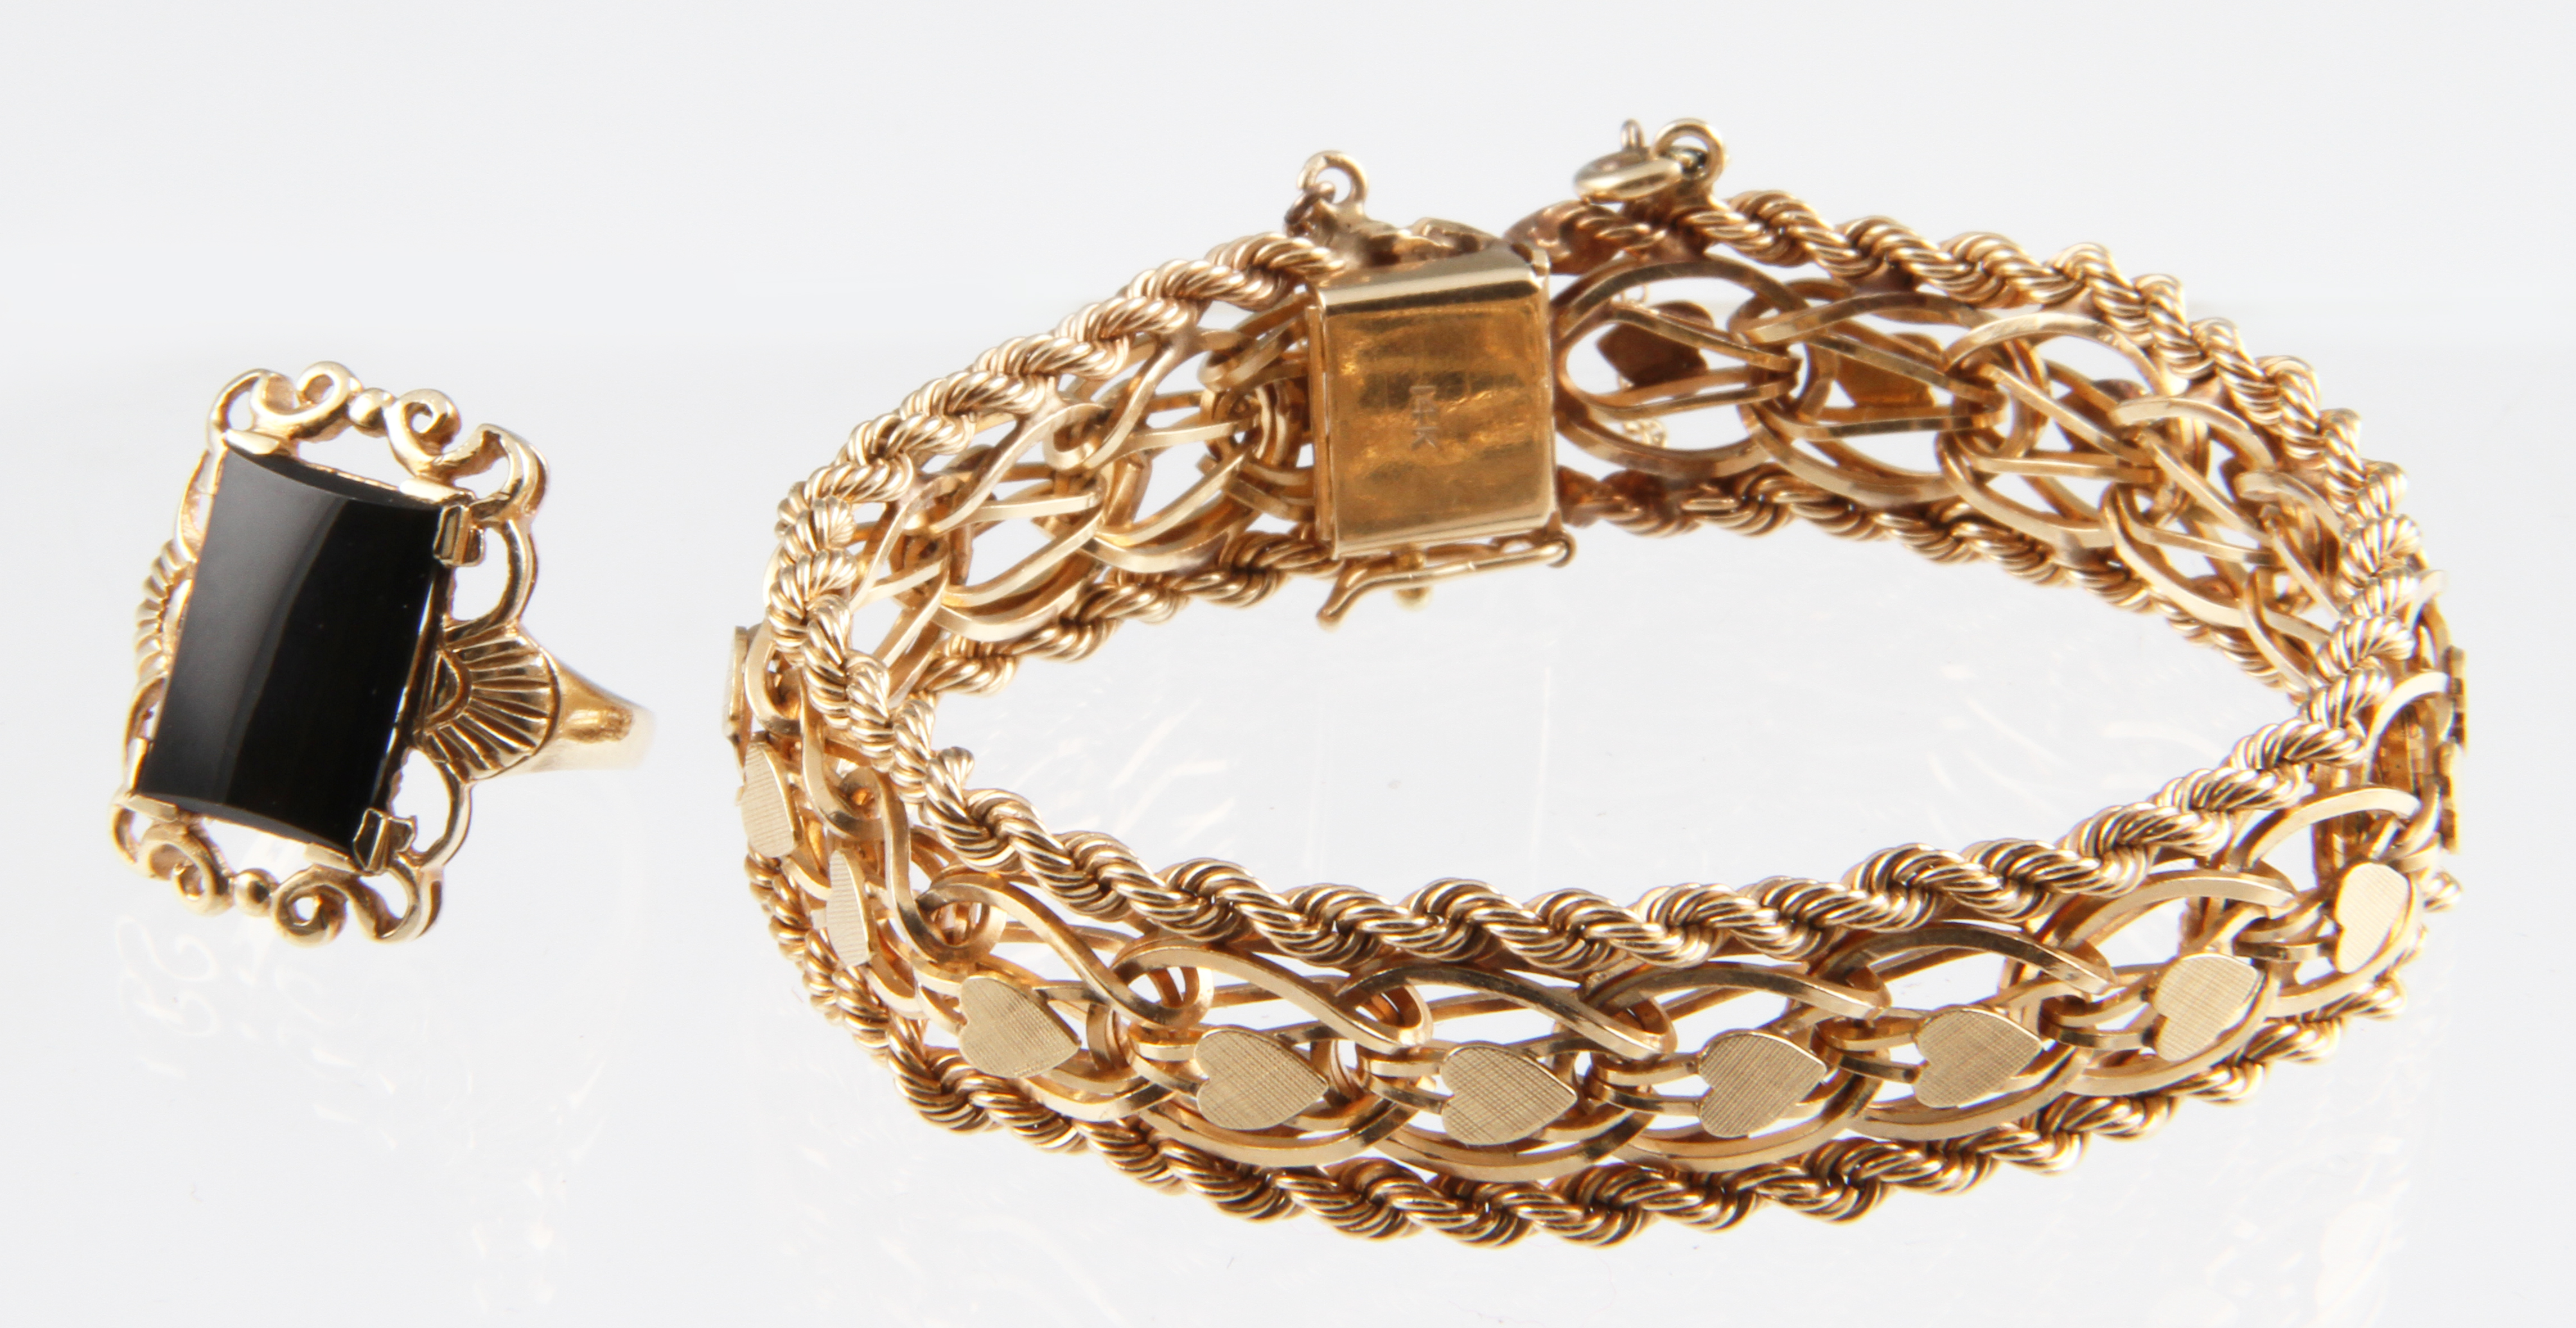 A 14k yellow gold bracelet with rope border detail with central linking and heart motif detail,